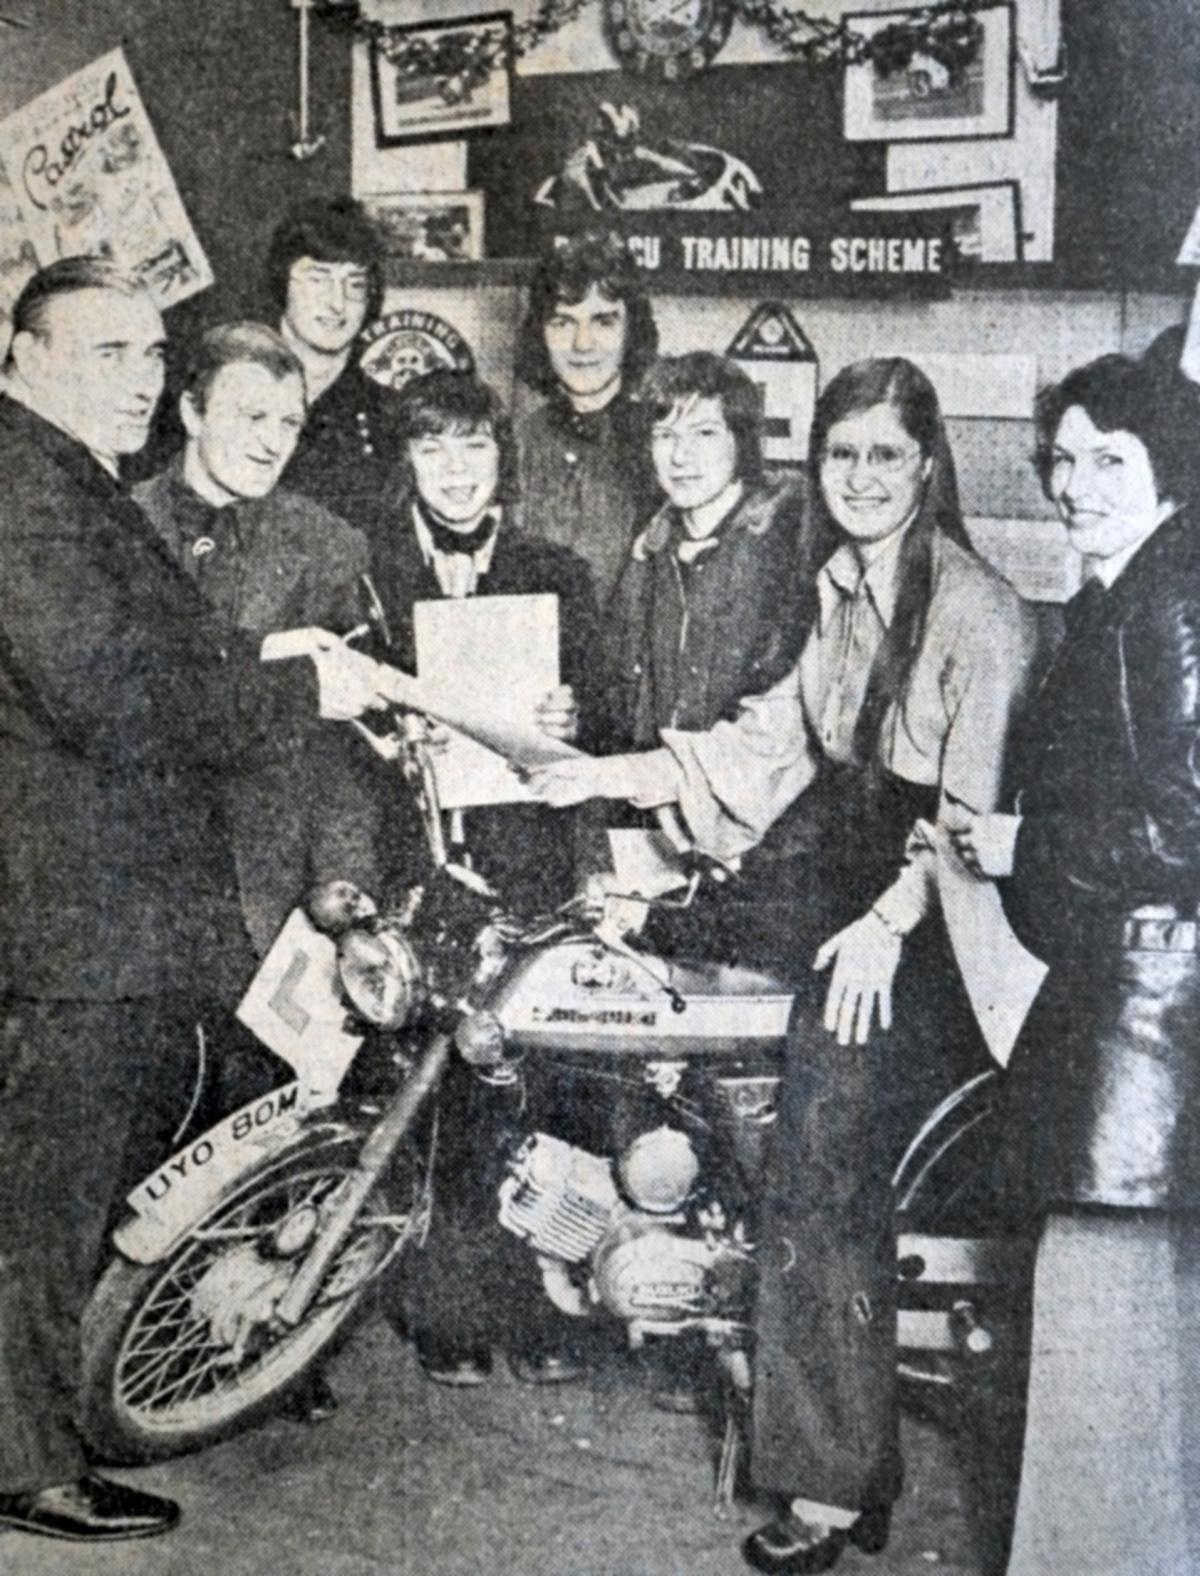 THERE was a nice Christmas present for Worcester Grammar School for Girls student Maxine Keyte in 1974, when the Christmas Eve edition of the Worcester Evening News carried the story she had gained a motor cycle proficiency certificate as a successful par